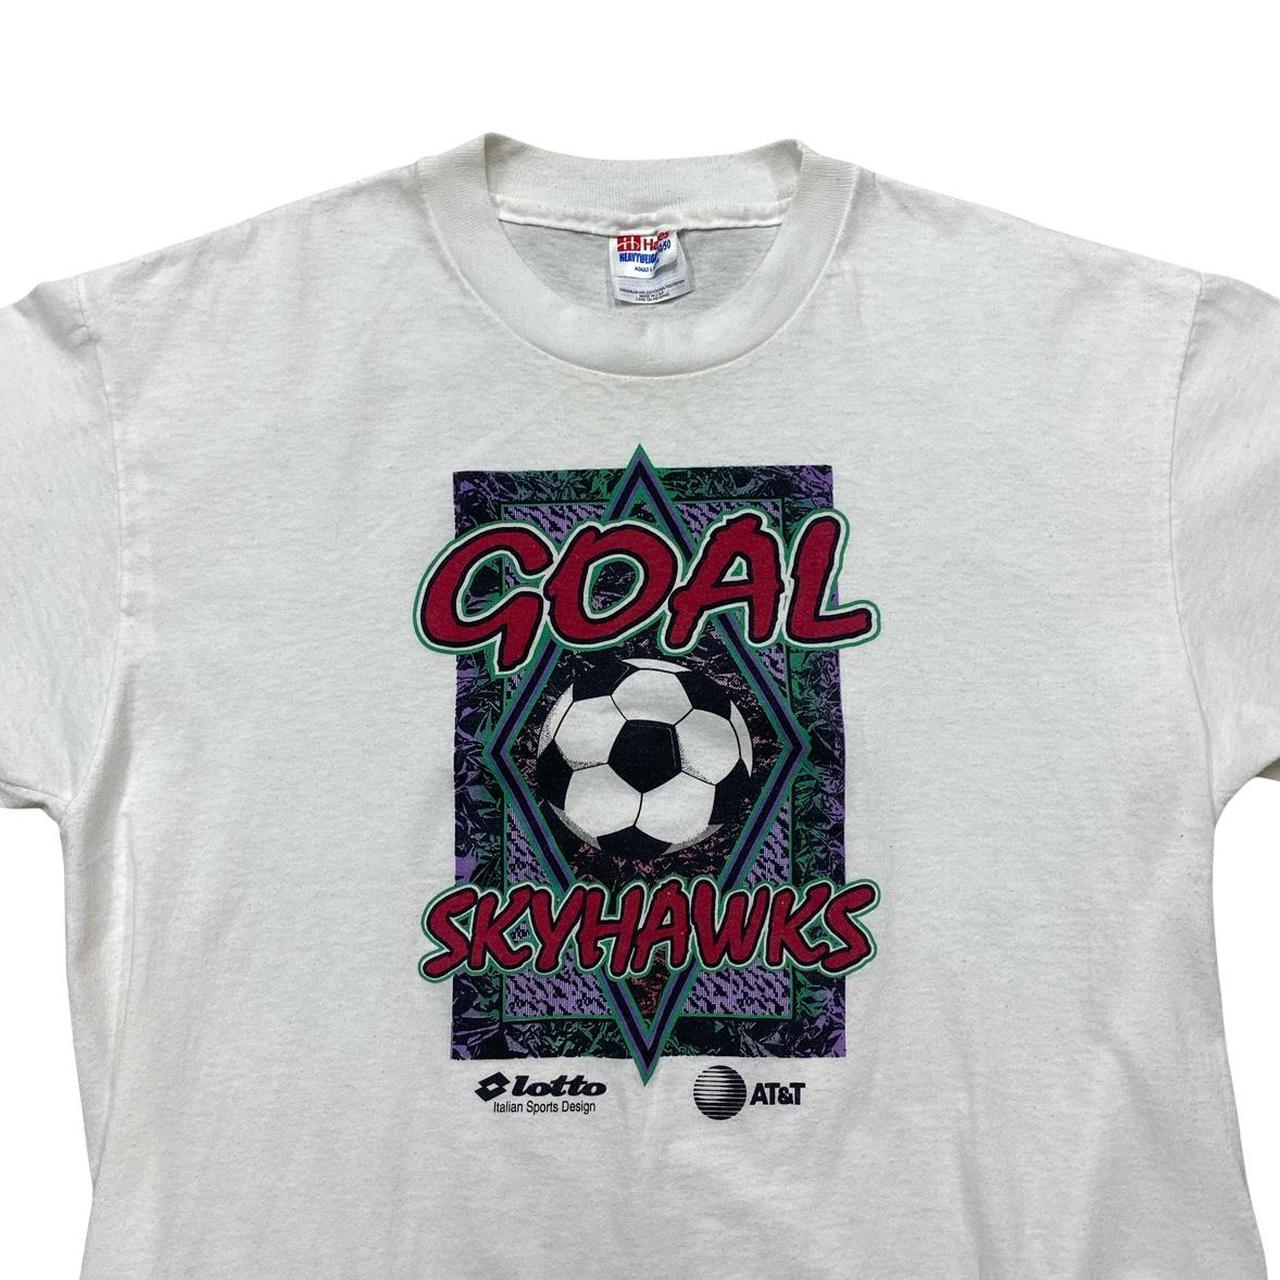 Product Image 2 - Vintage Lotto Soccer Tee
Single Stitched/Made